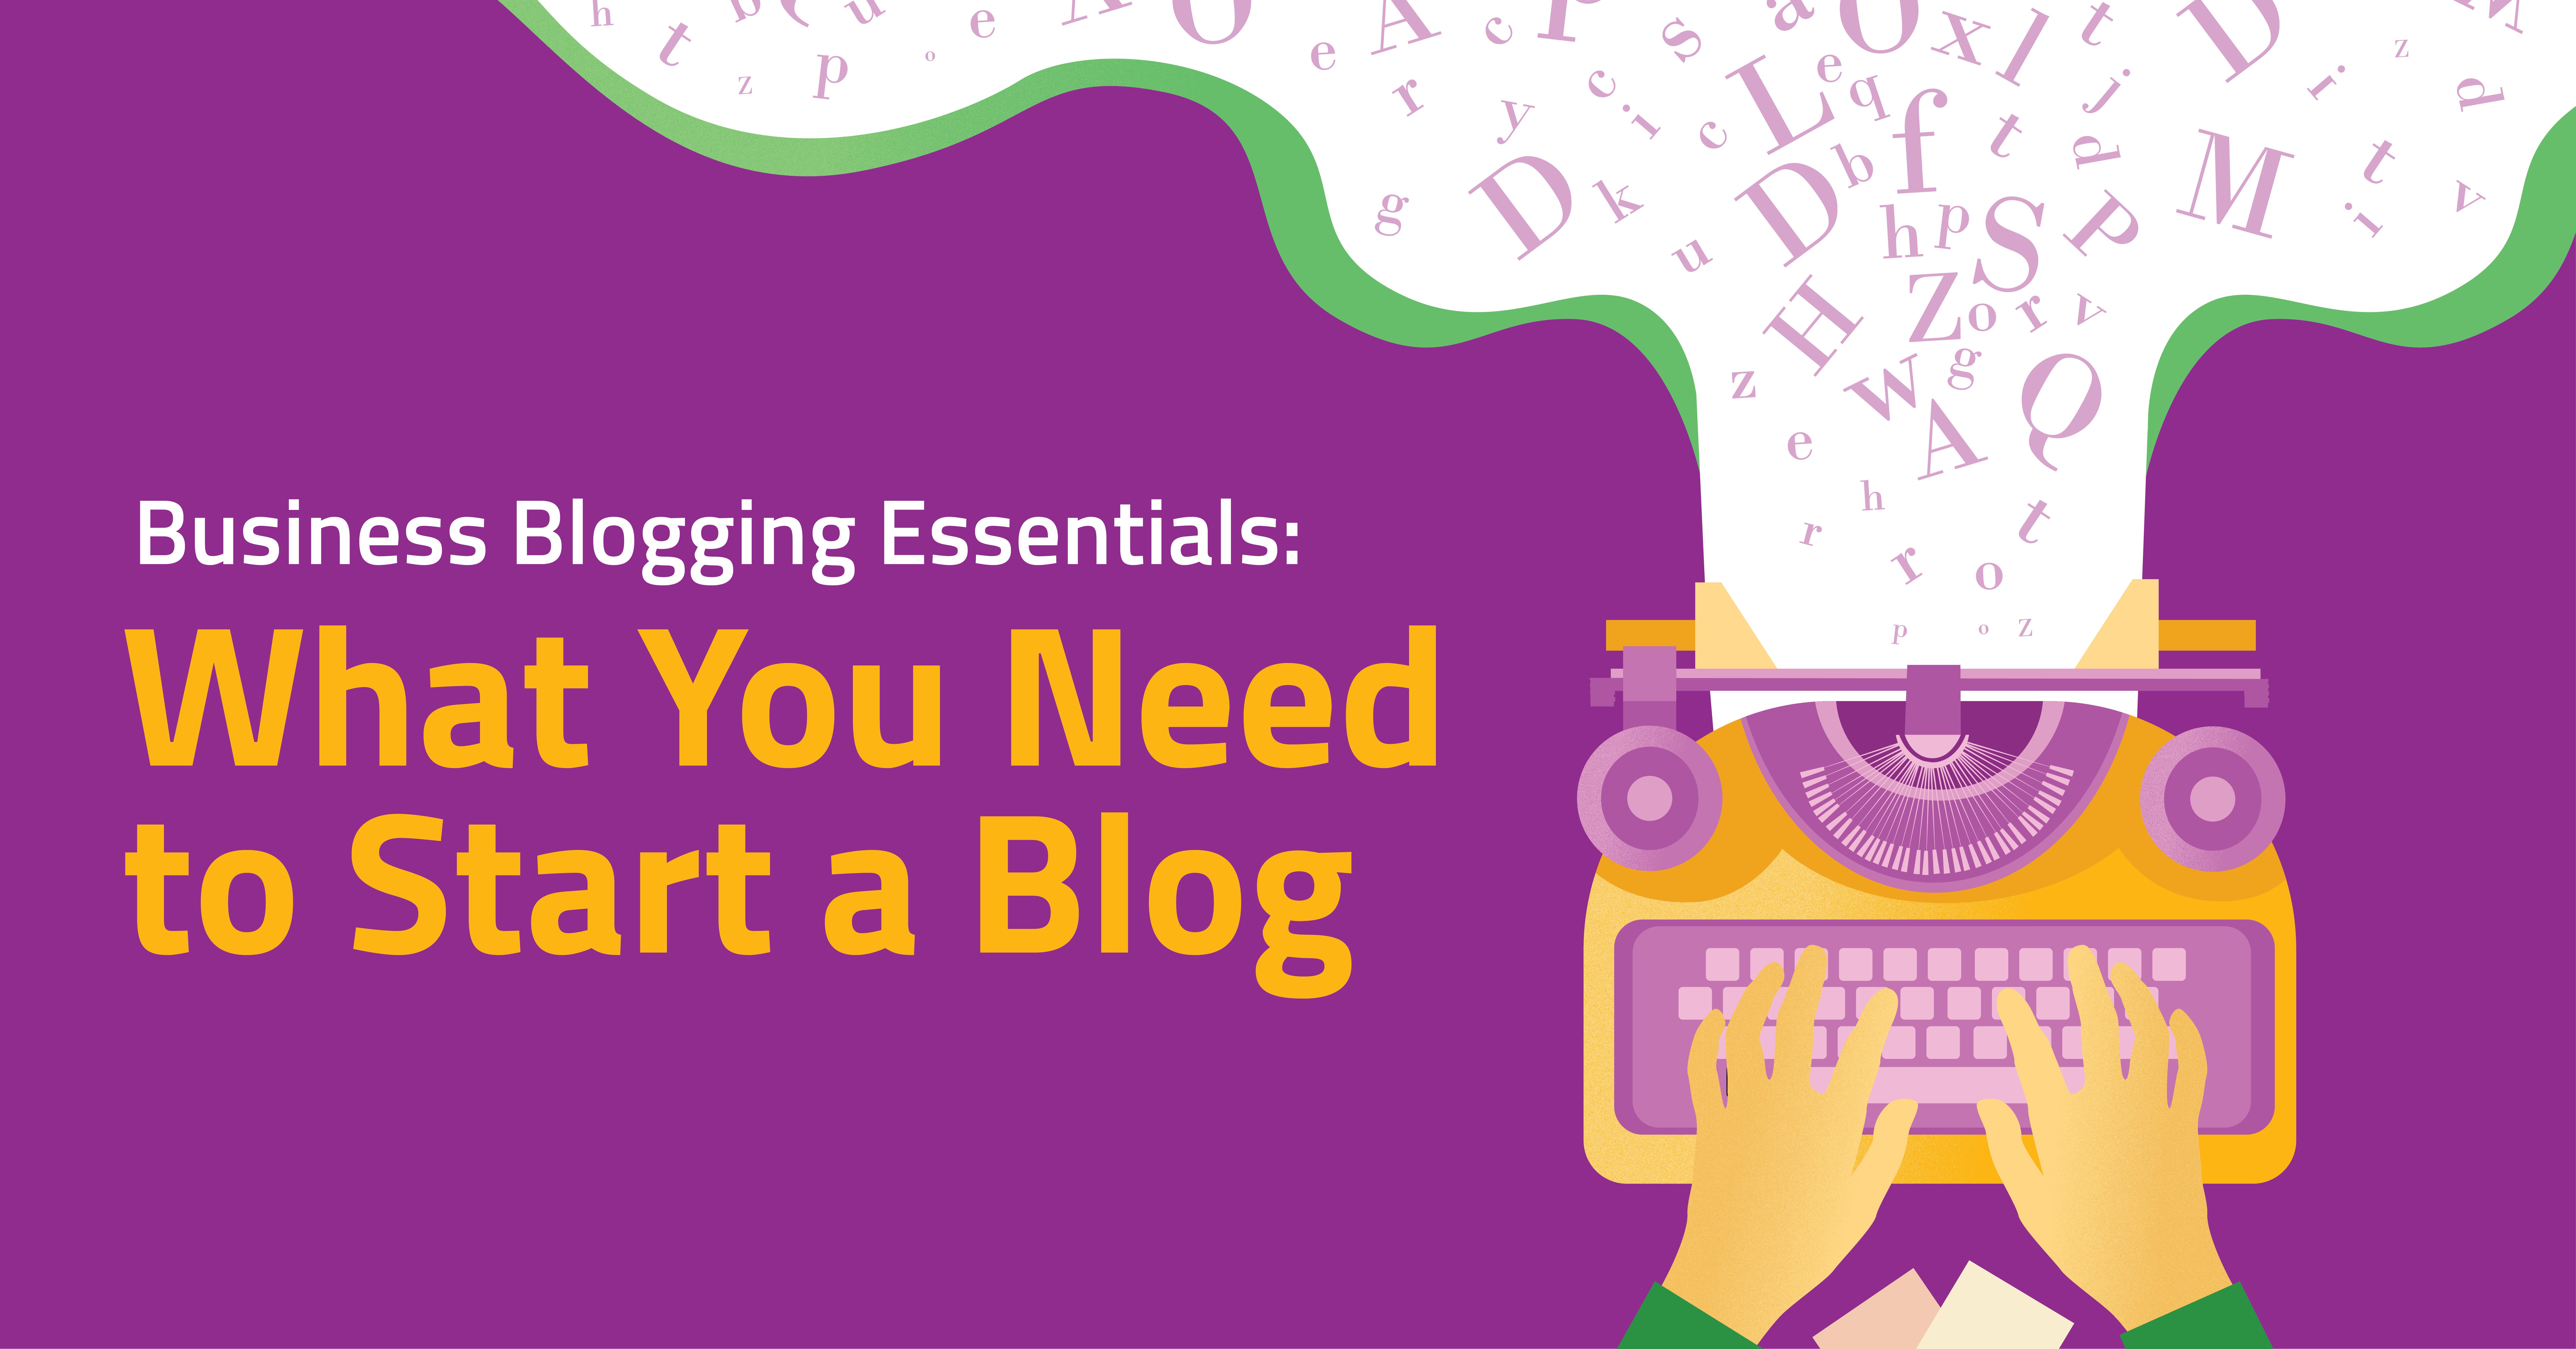 What You Need to Start a Blog